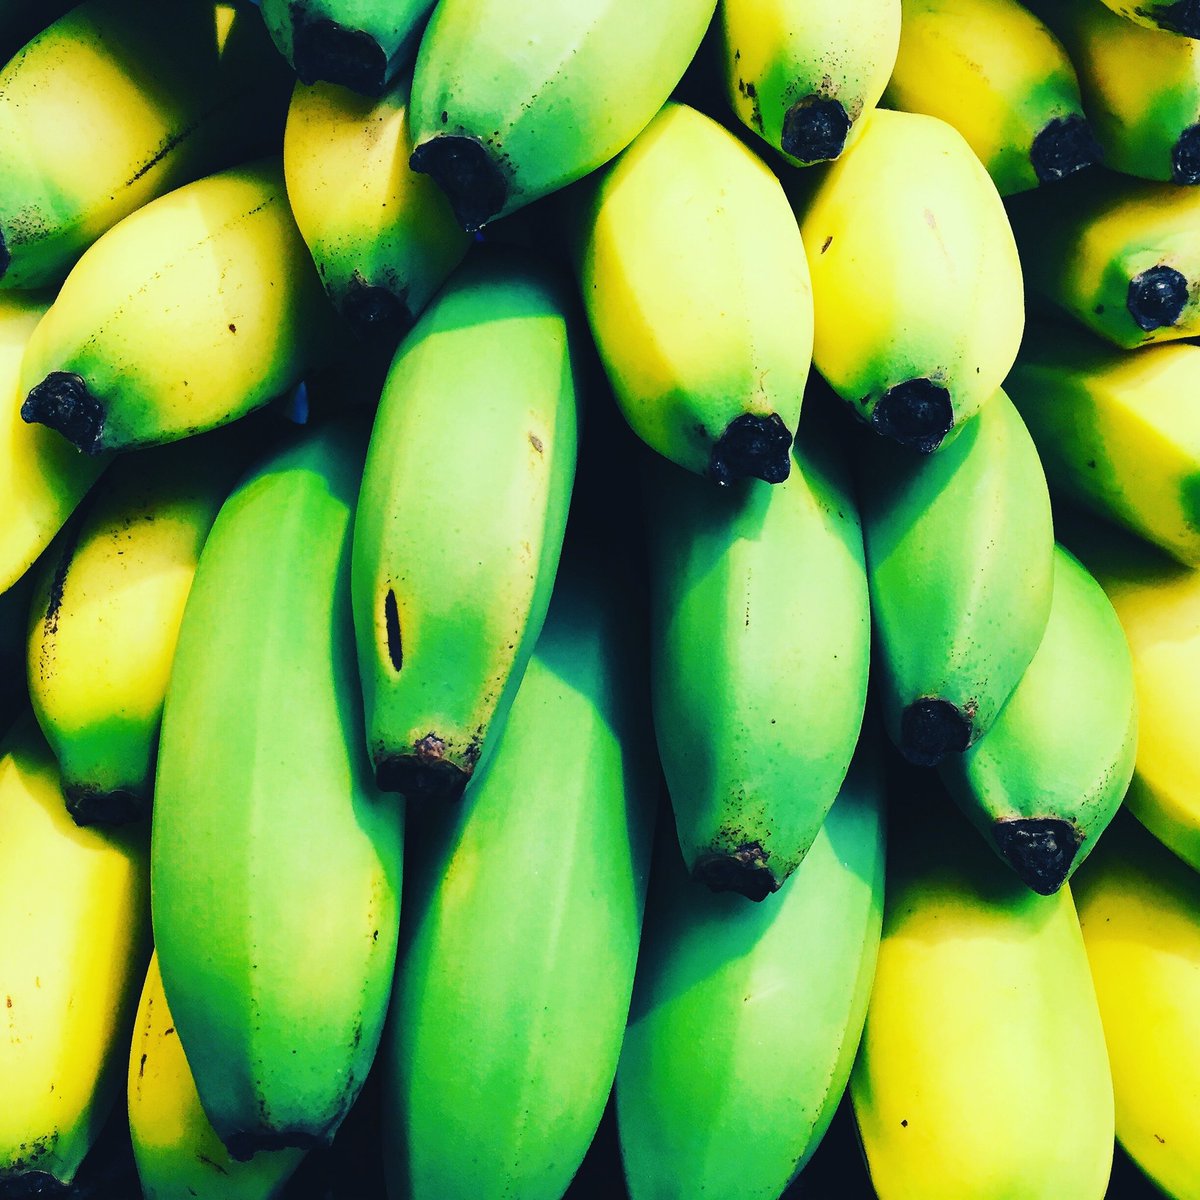 #resistantstarches like #greenbananas are great #lowfodmap #gutbug boosters! 🐛
If you are following a #fodmapdiet and not too keen on the overly restrictive nature of the diet 😖 try introducing #prebioticfibre like underripe #greenbanana 🍌 to top up those #bifidobacteria